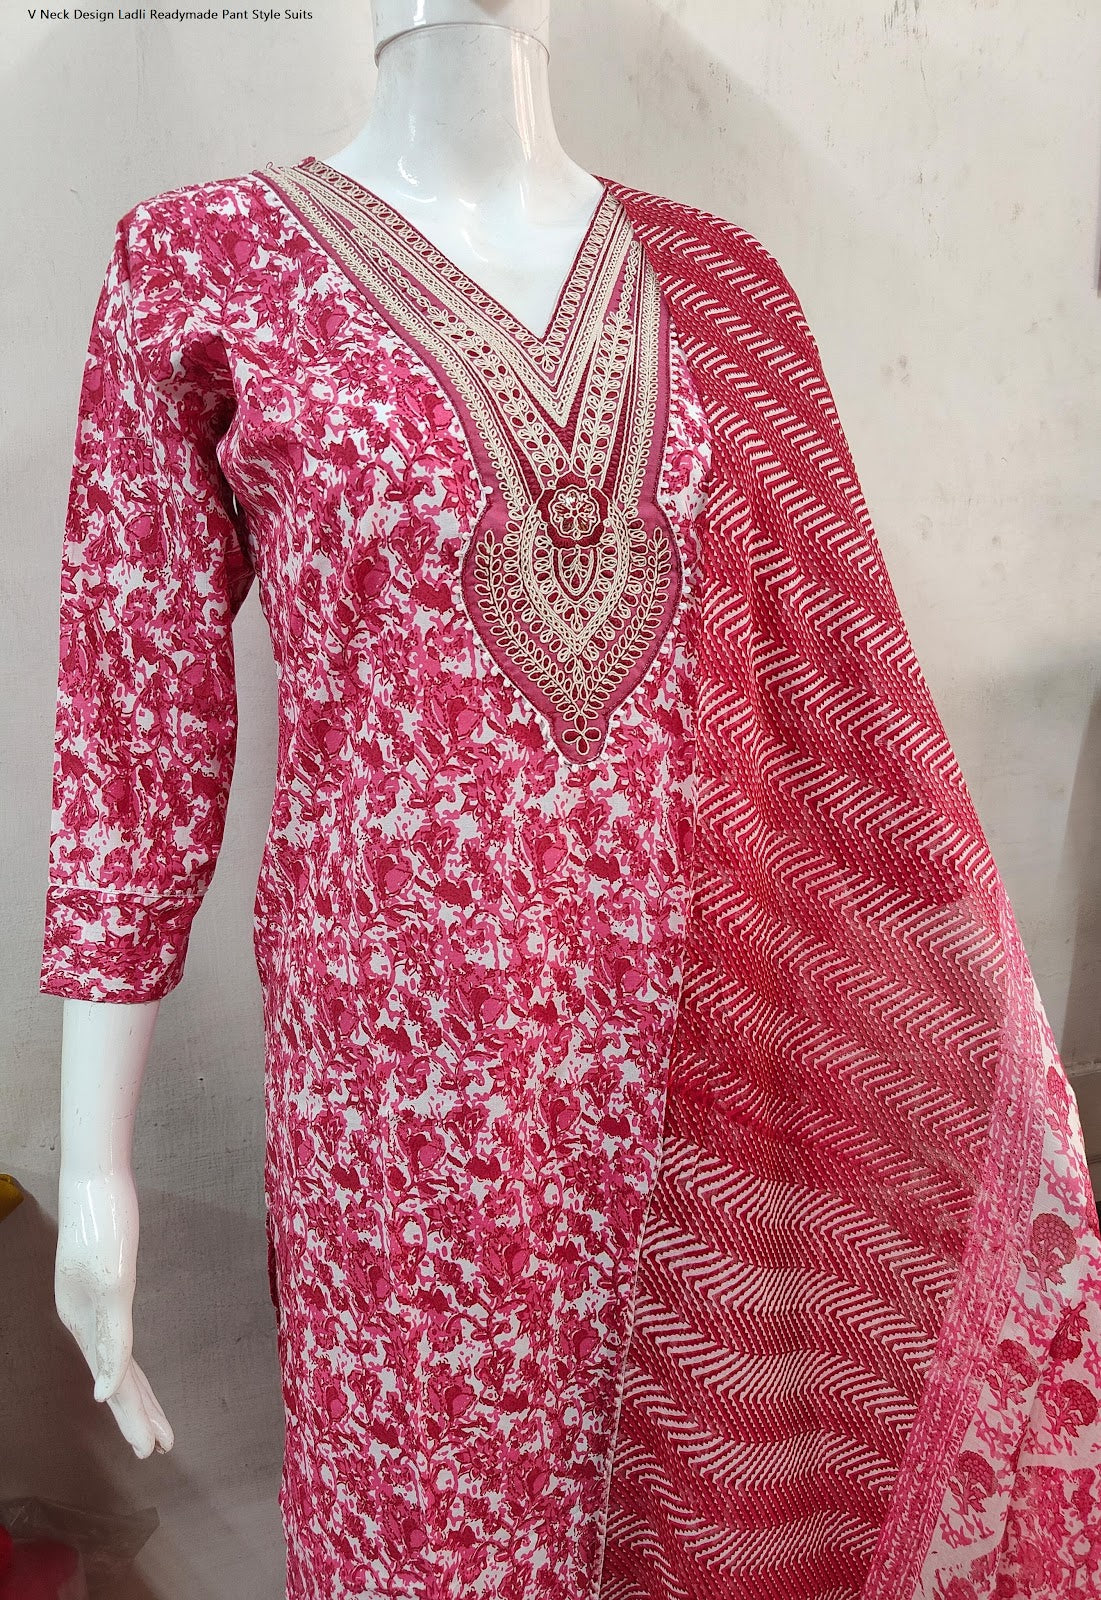 V Neck Design Ladli Cotton Cambric Readymade Pant Style Suits Supplier India